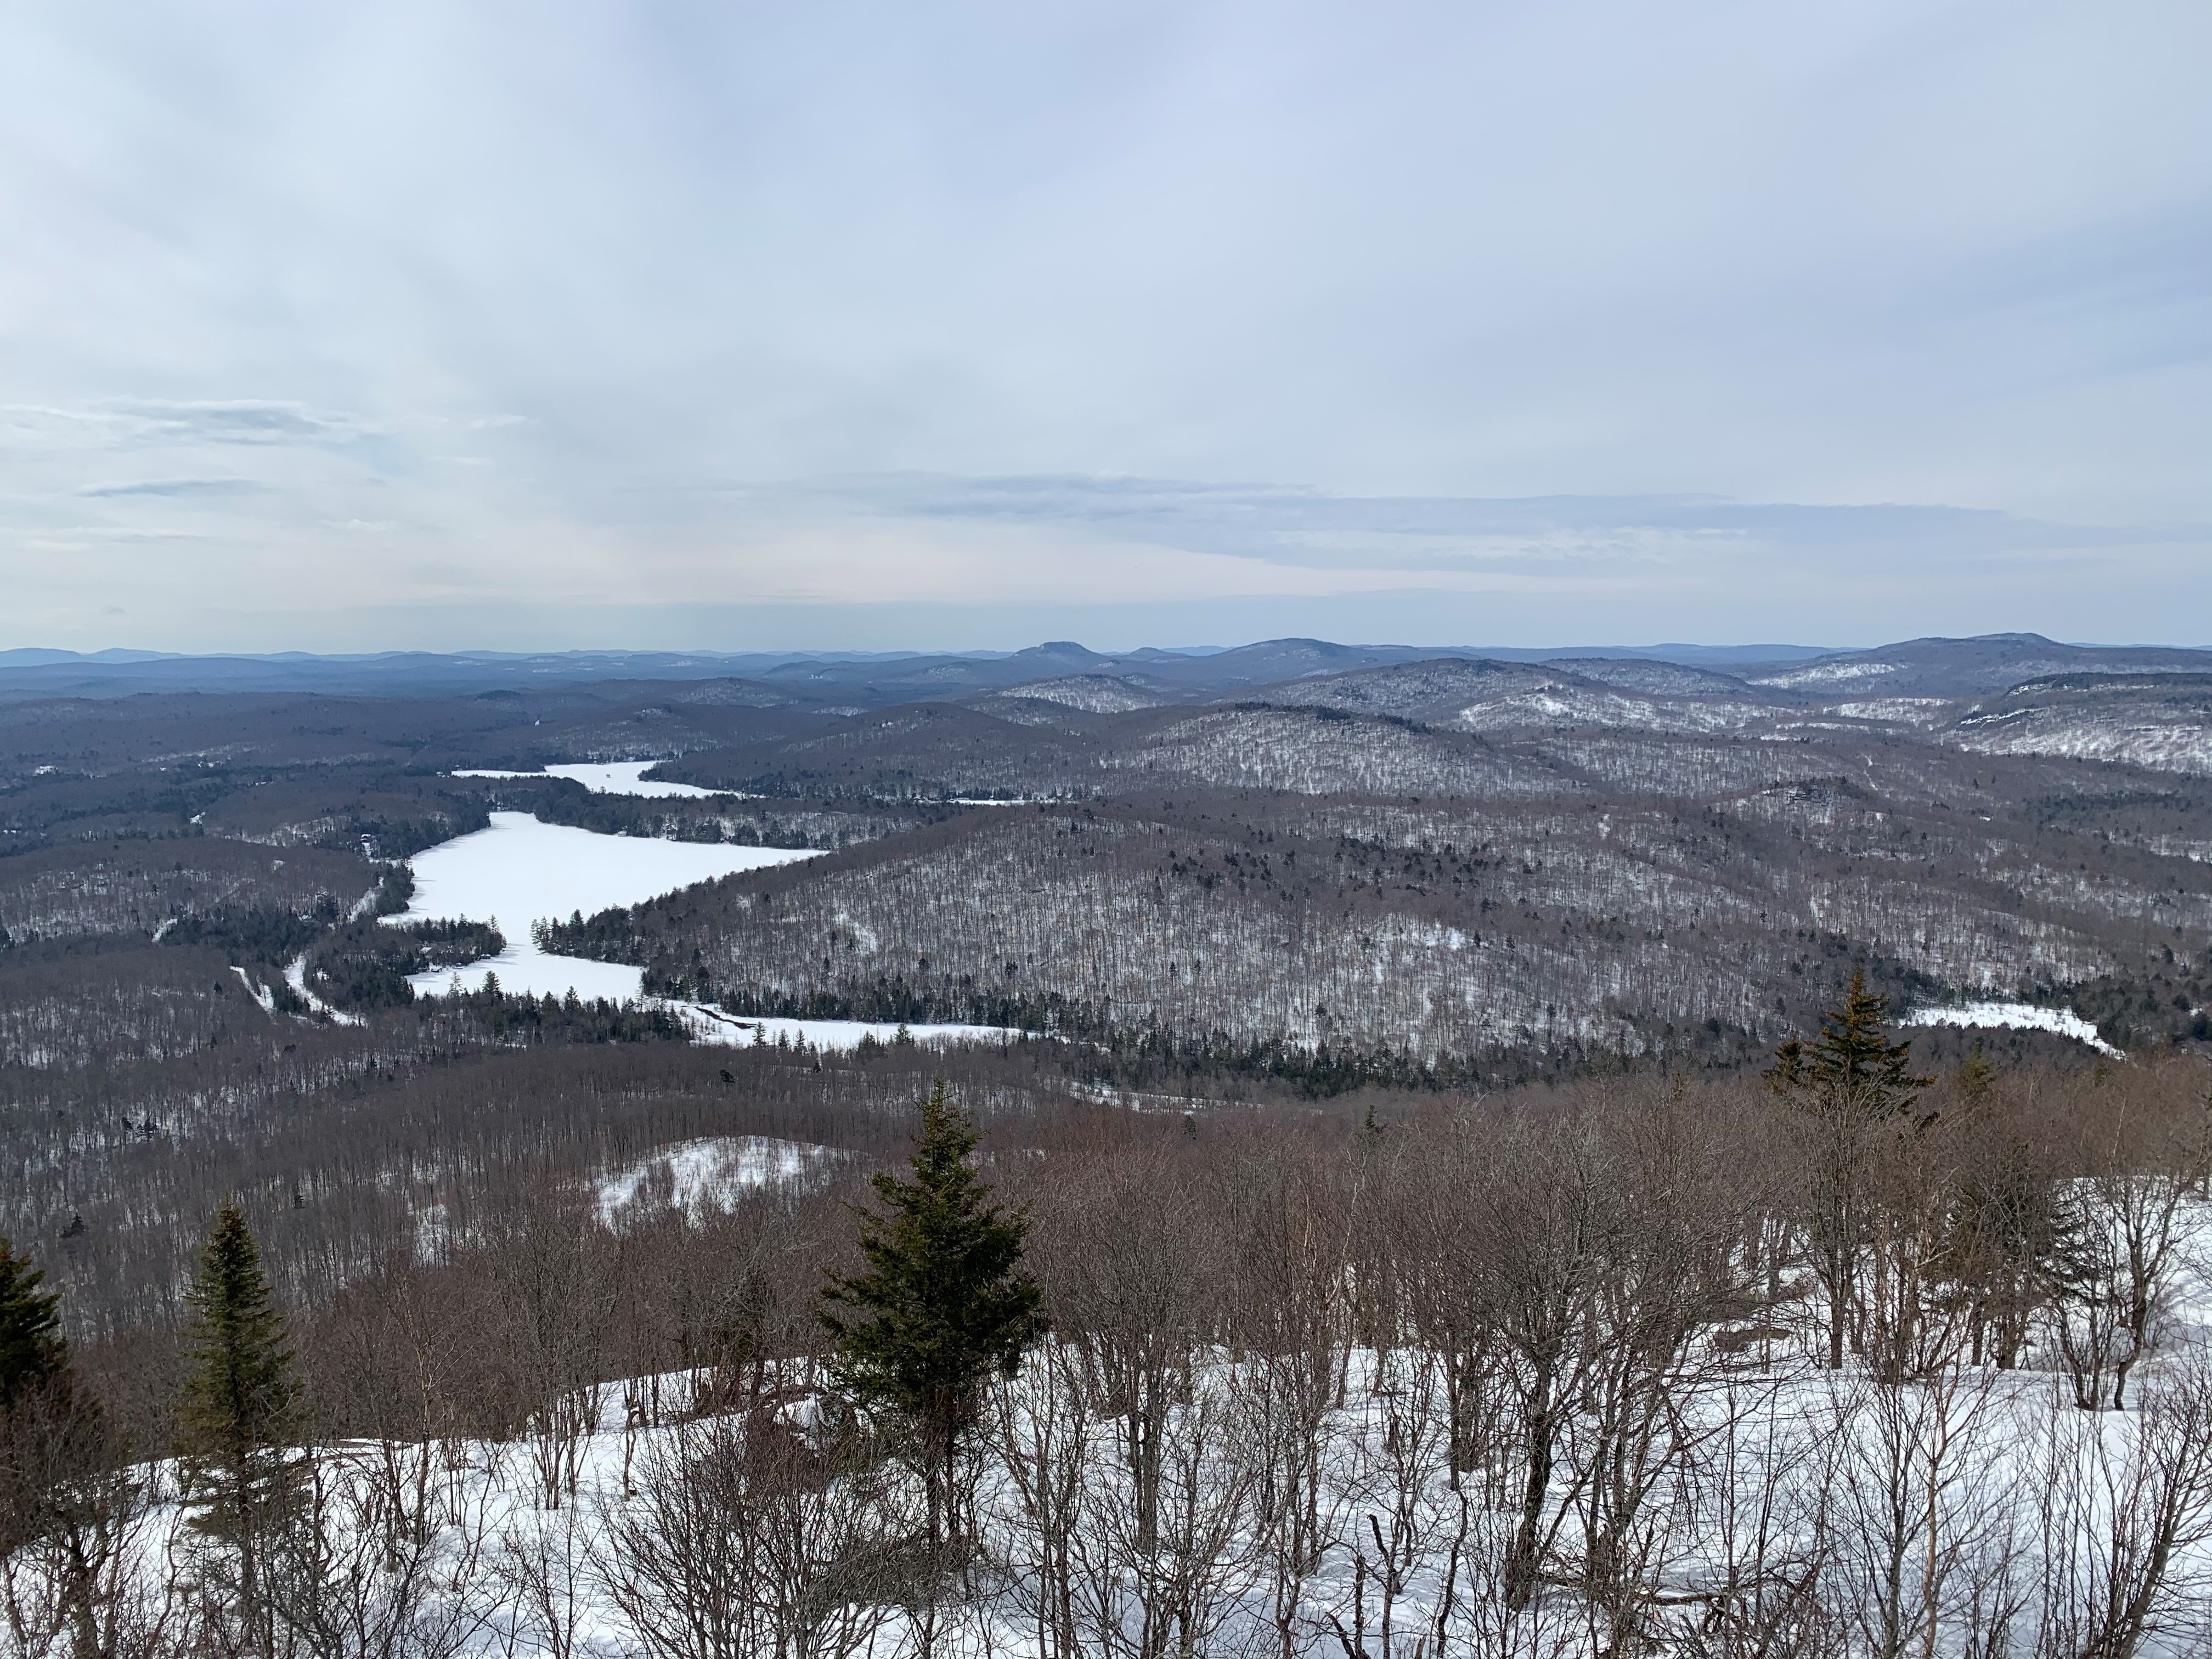 View from Mount Arab fire tower